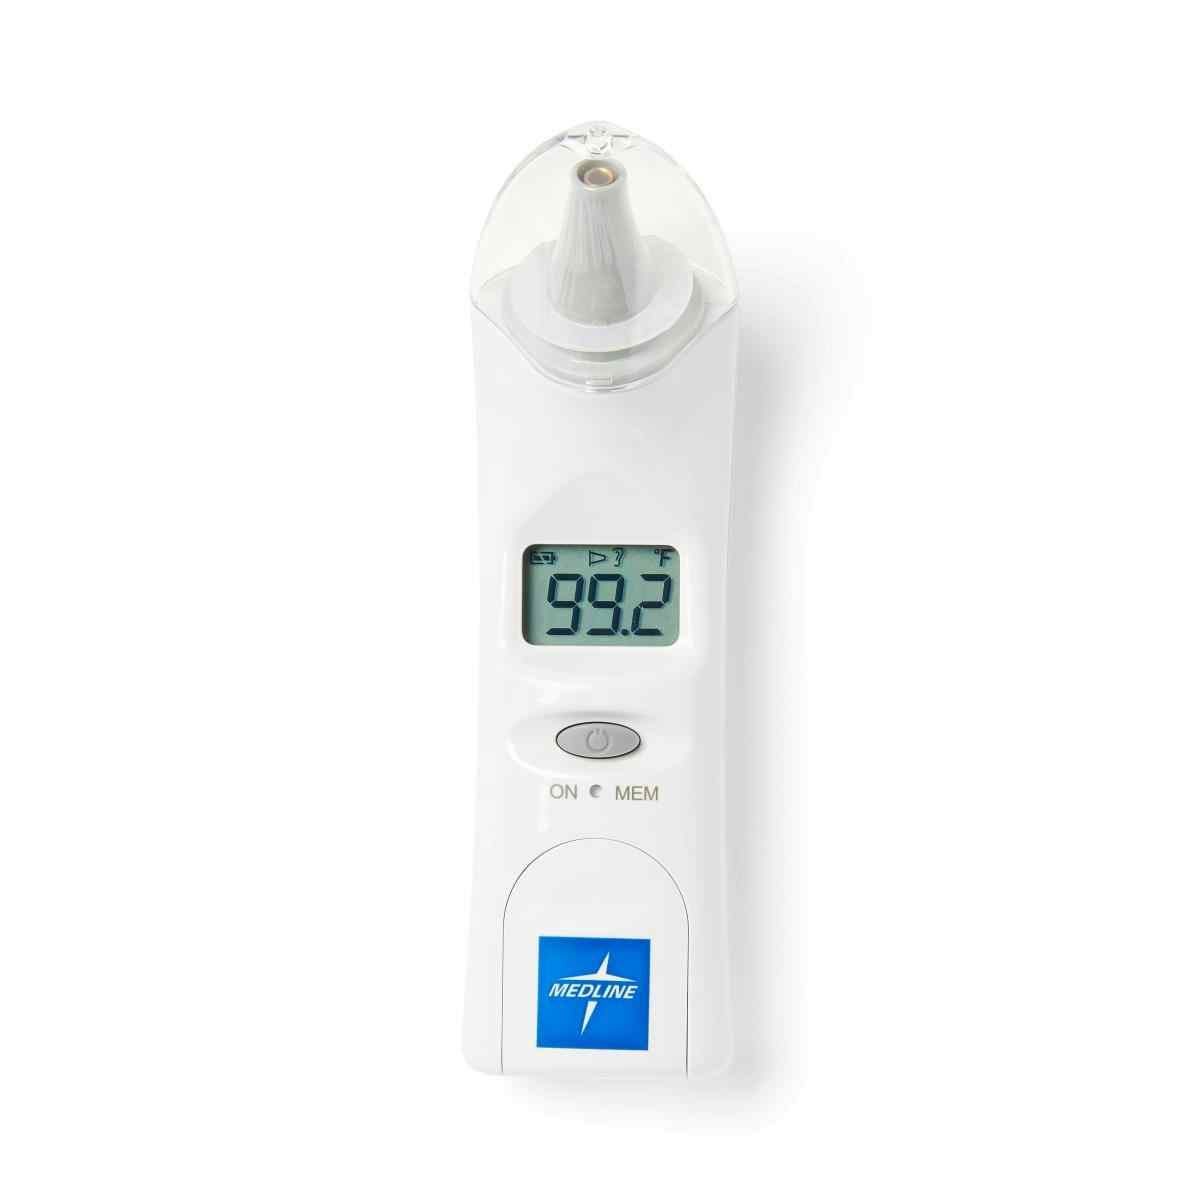 Medline Tympanic Ear Thermometer, Easy Probe Release, MDS9700, 1 Each